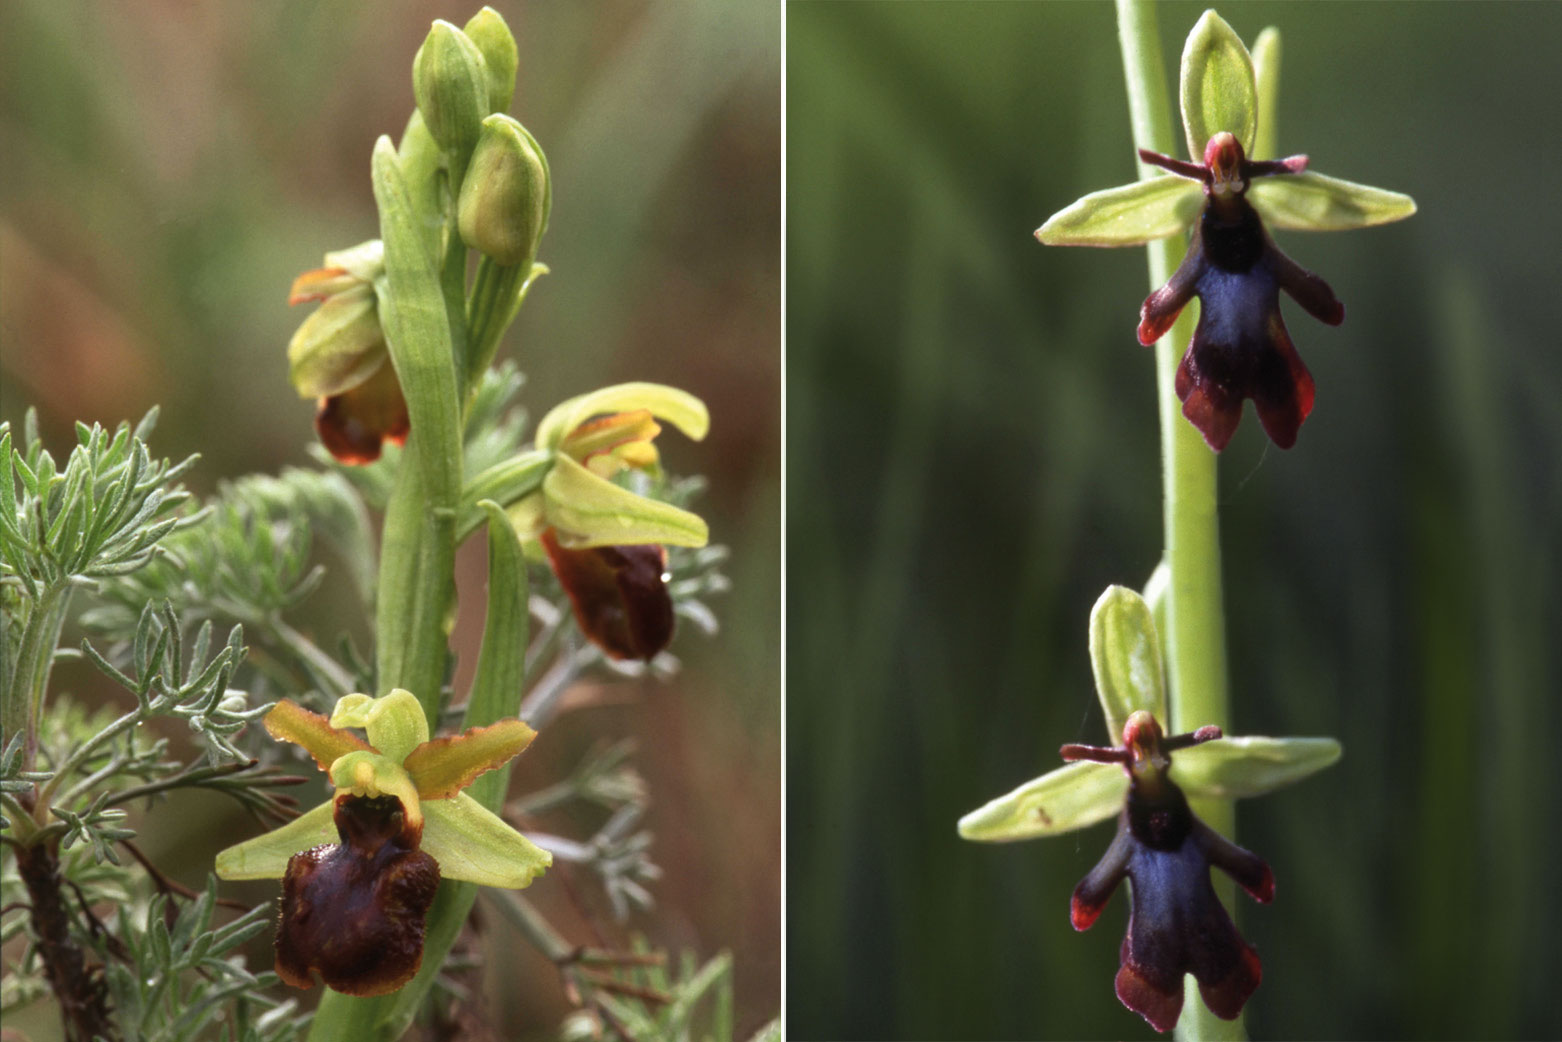 Flora del Veneto, Fior Mosca (Ophrys insectifera) e Fior Ragno (Ophrys sphegodes).